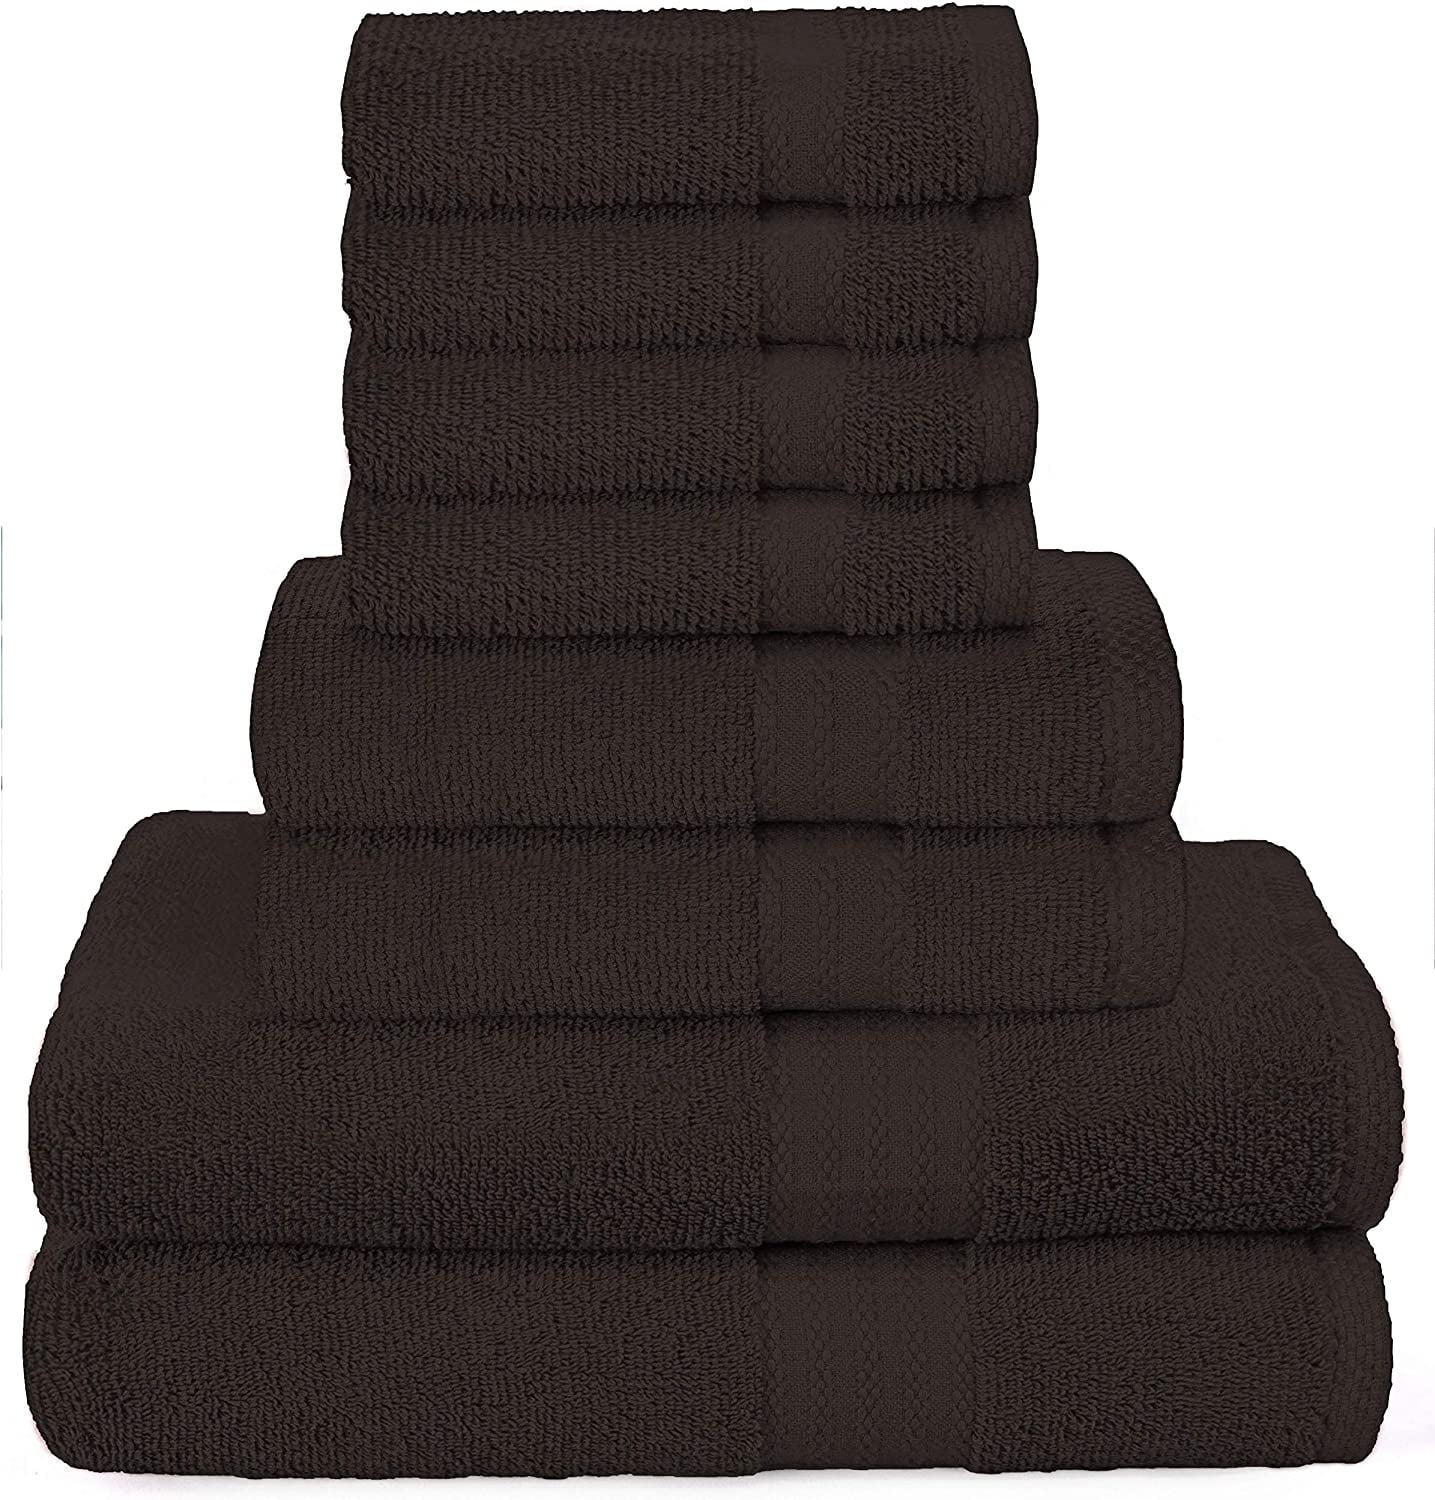 GLAMBURG Ultra Soft 8-Piece Towel Set - 100% Pure Ringspun Cotton, Contains 2 Oversized Bath Towels 27x54, 2 Hand Towels 16x28, 4 Wash Cloths 13x13 - Ideal for Everyday use - Chocolate Brown